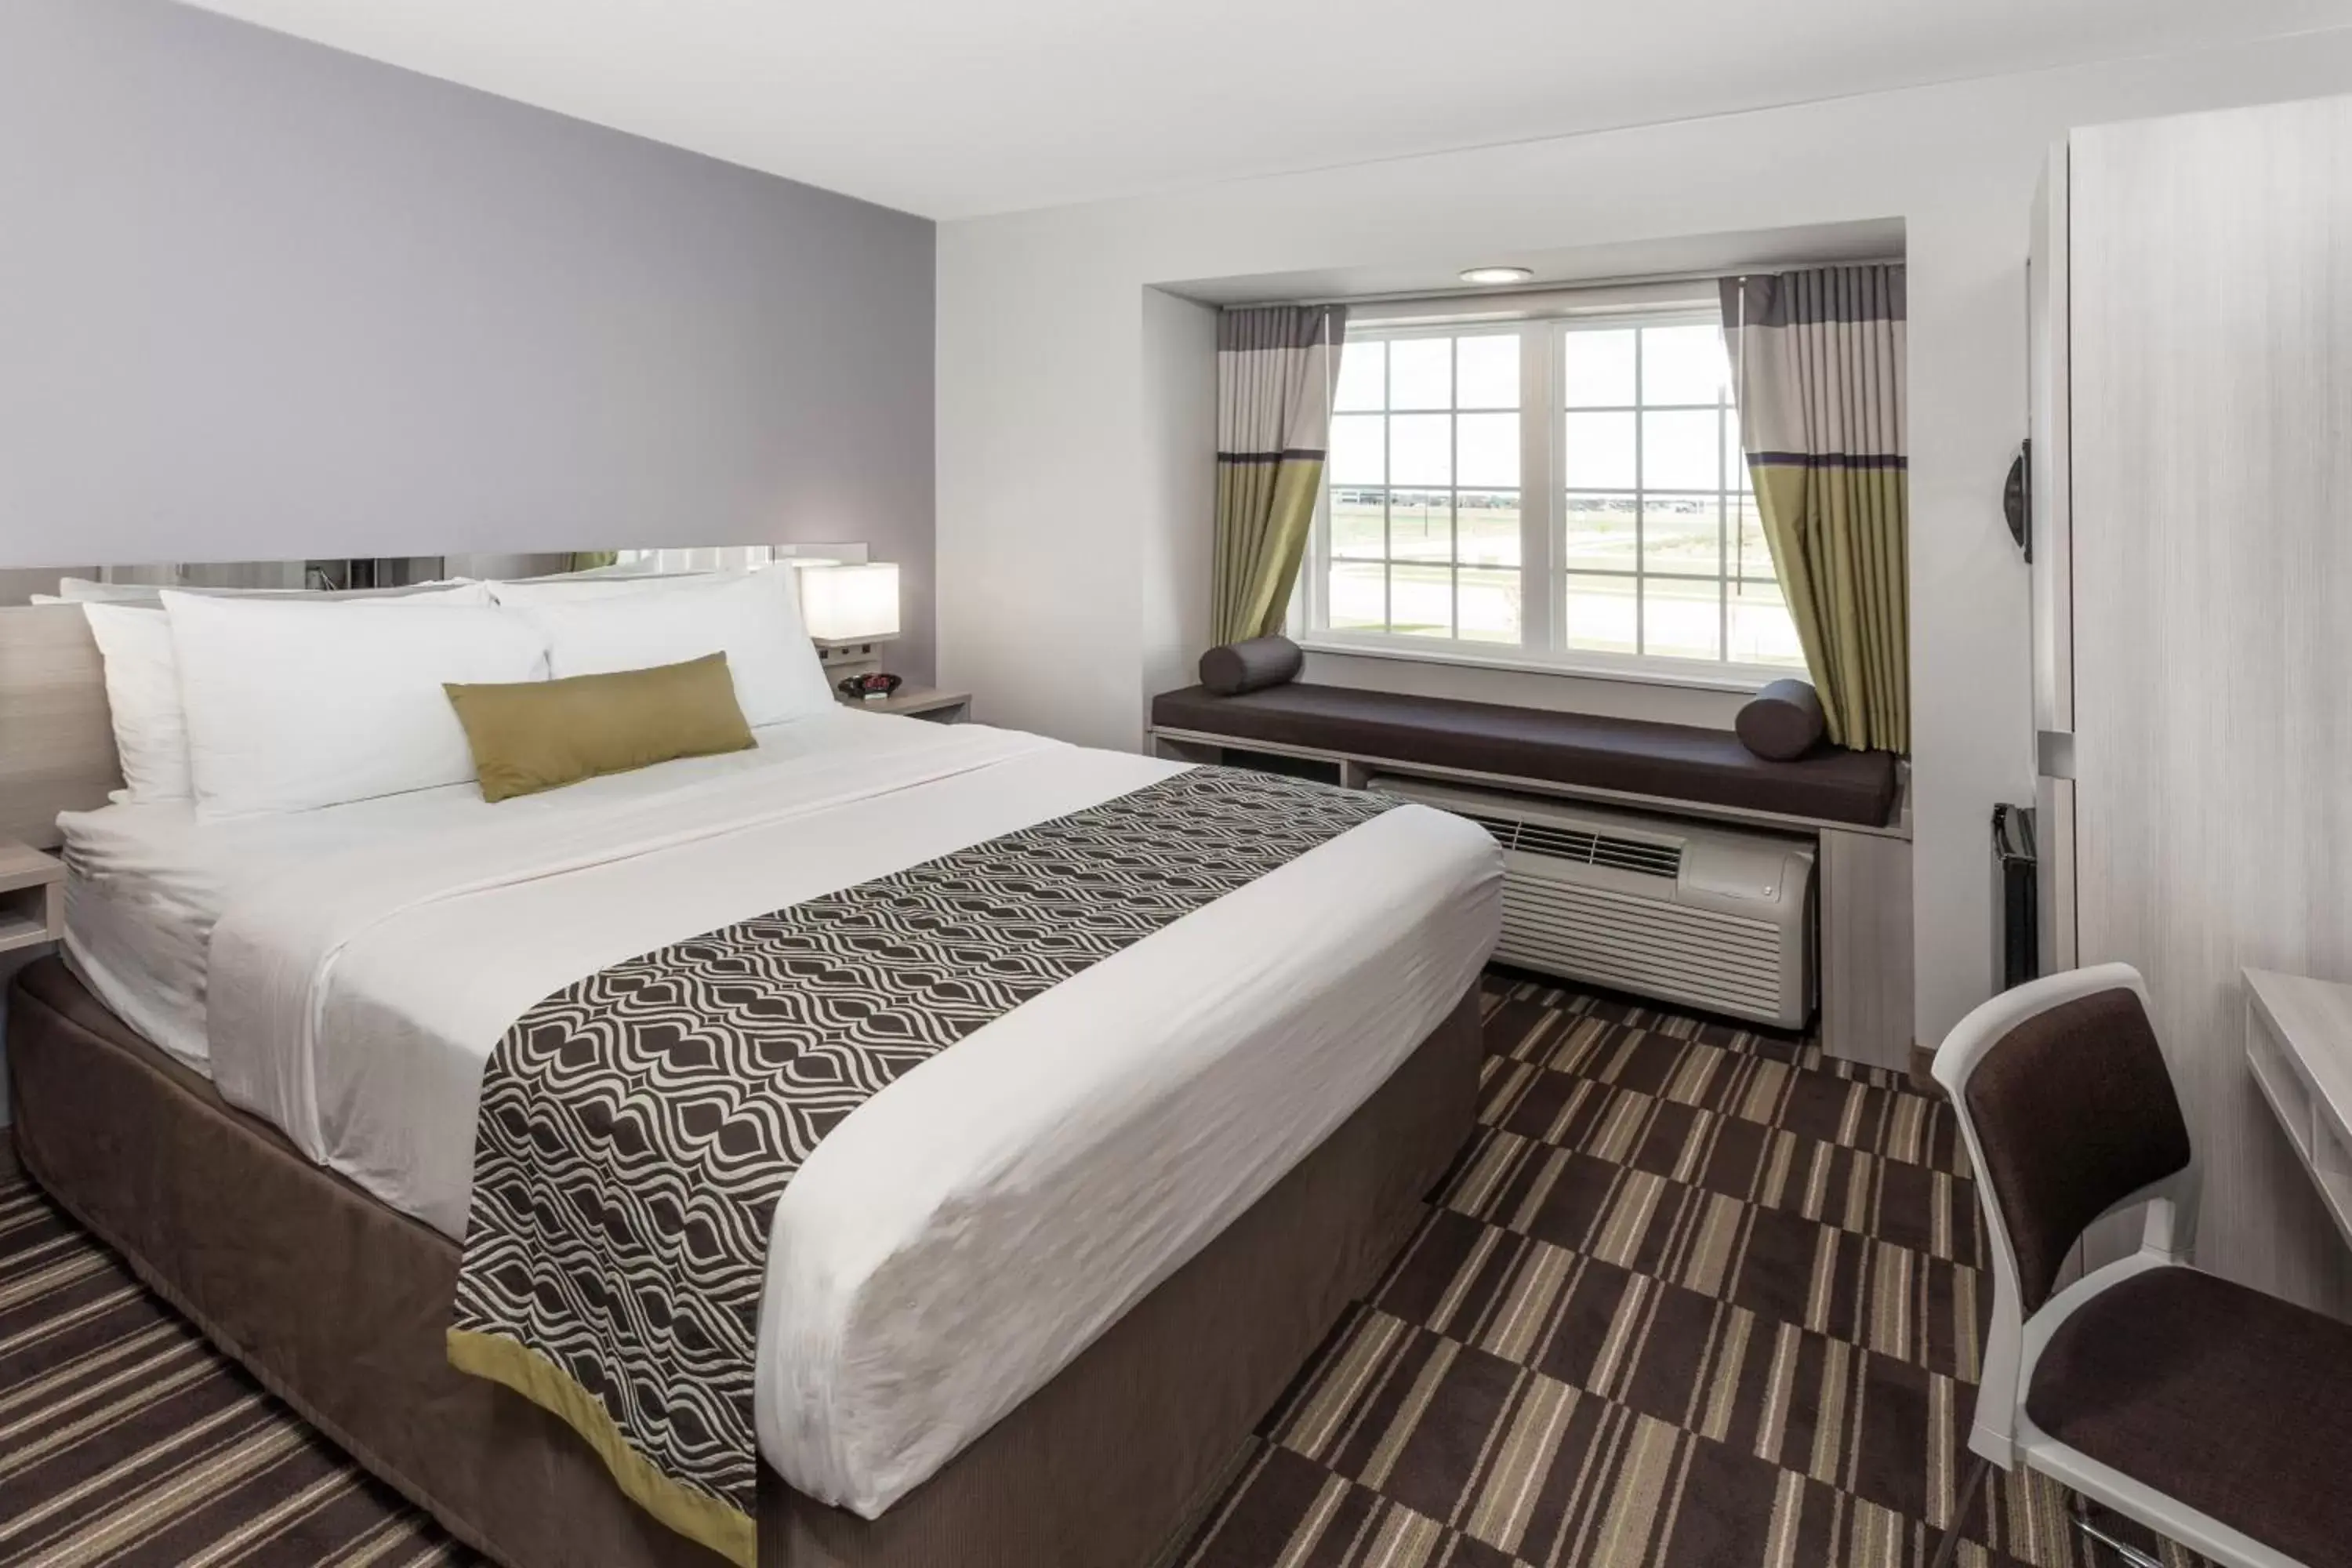 Queen Room - Non-Smoking in Microtel Inn & Suites by Wyndham West Fargo Near Medical Center